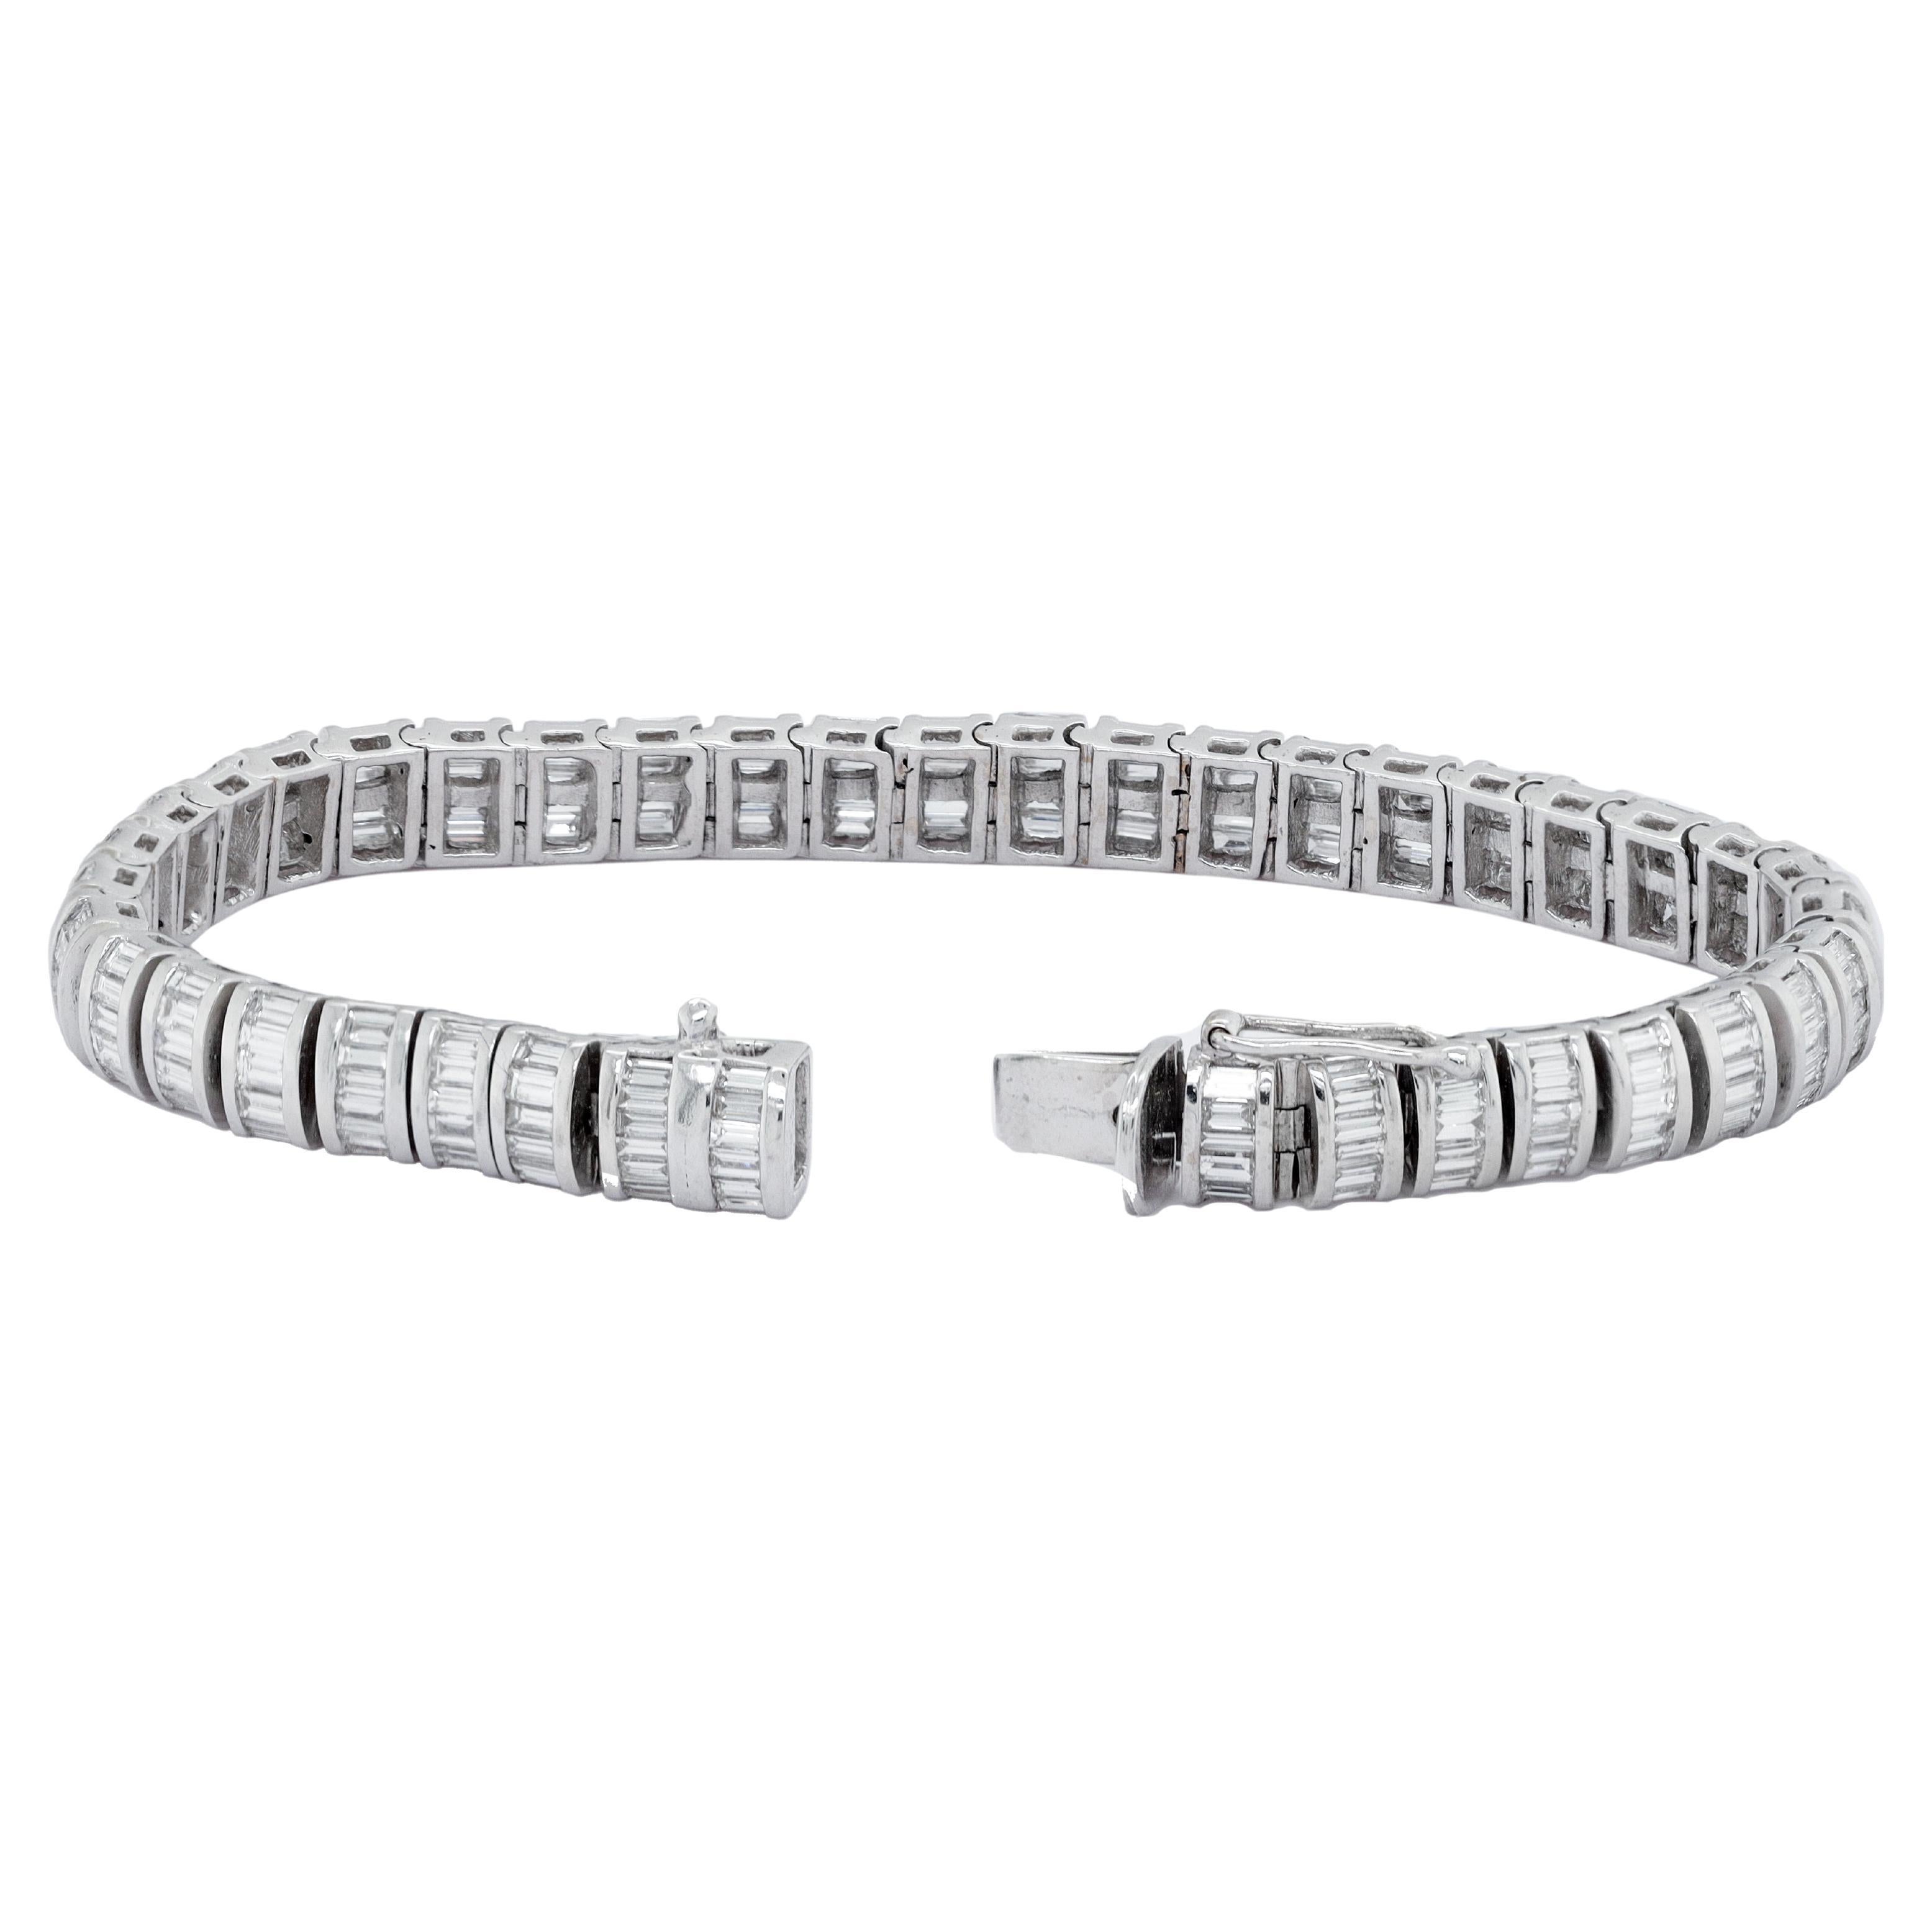 Diana M.18 kt white gold diamond tennis bracelet adorned with 8.41 cts tw